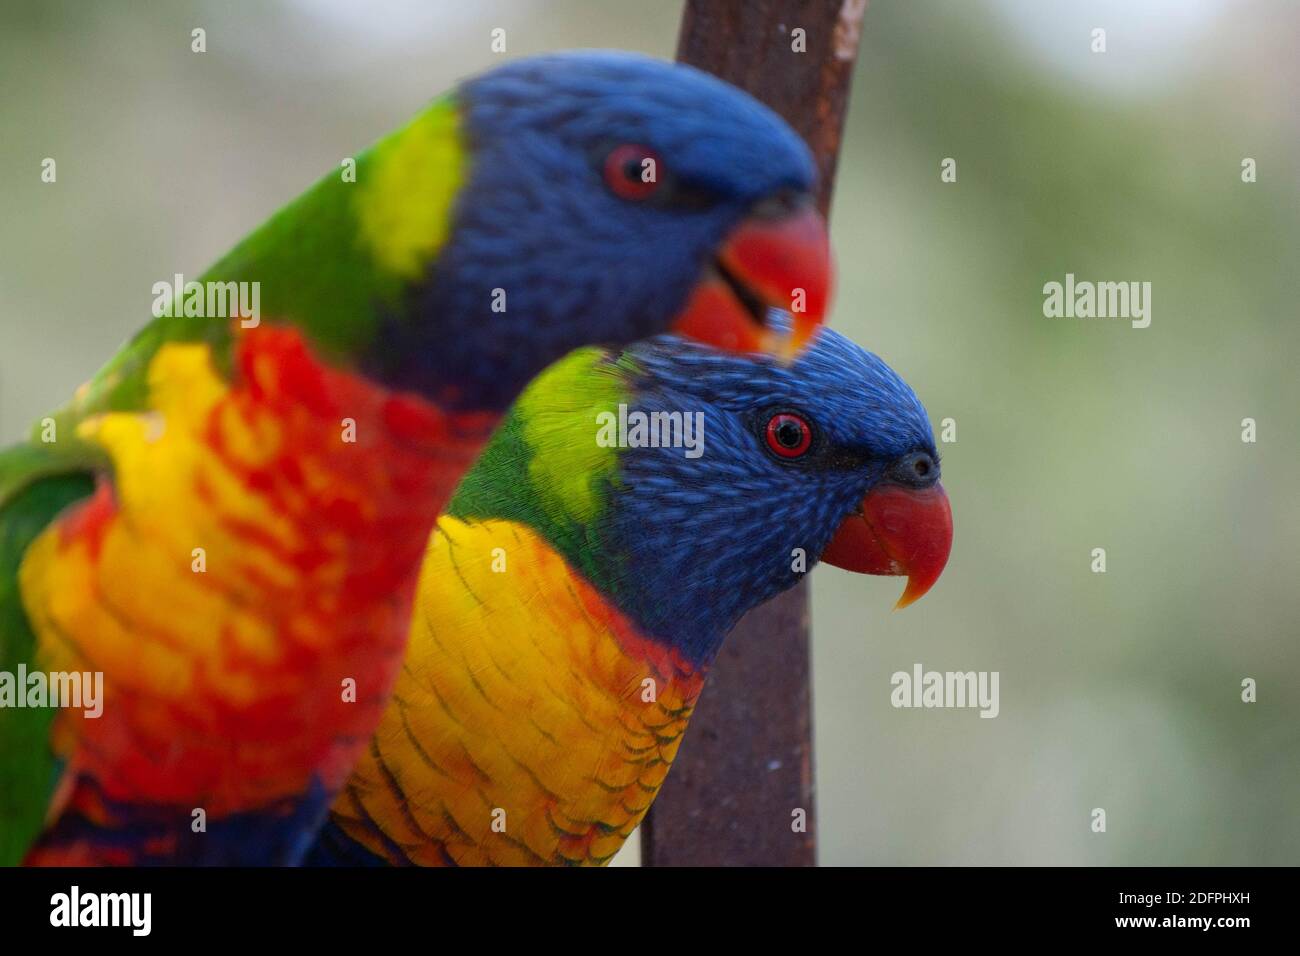 Pair of colorful lorikeet parrots in Australia in a feeder Stock Photo